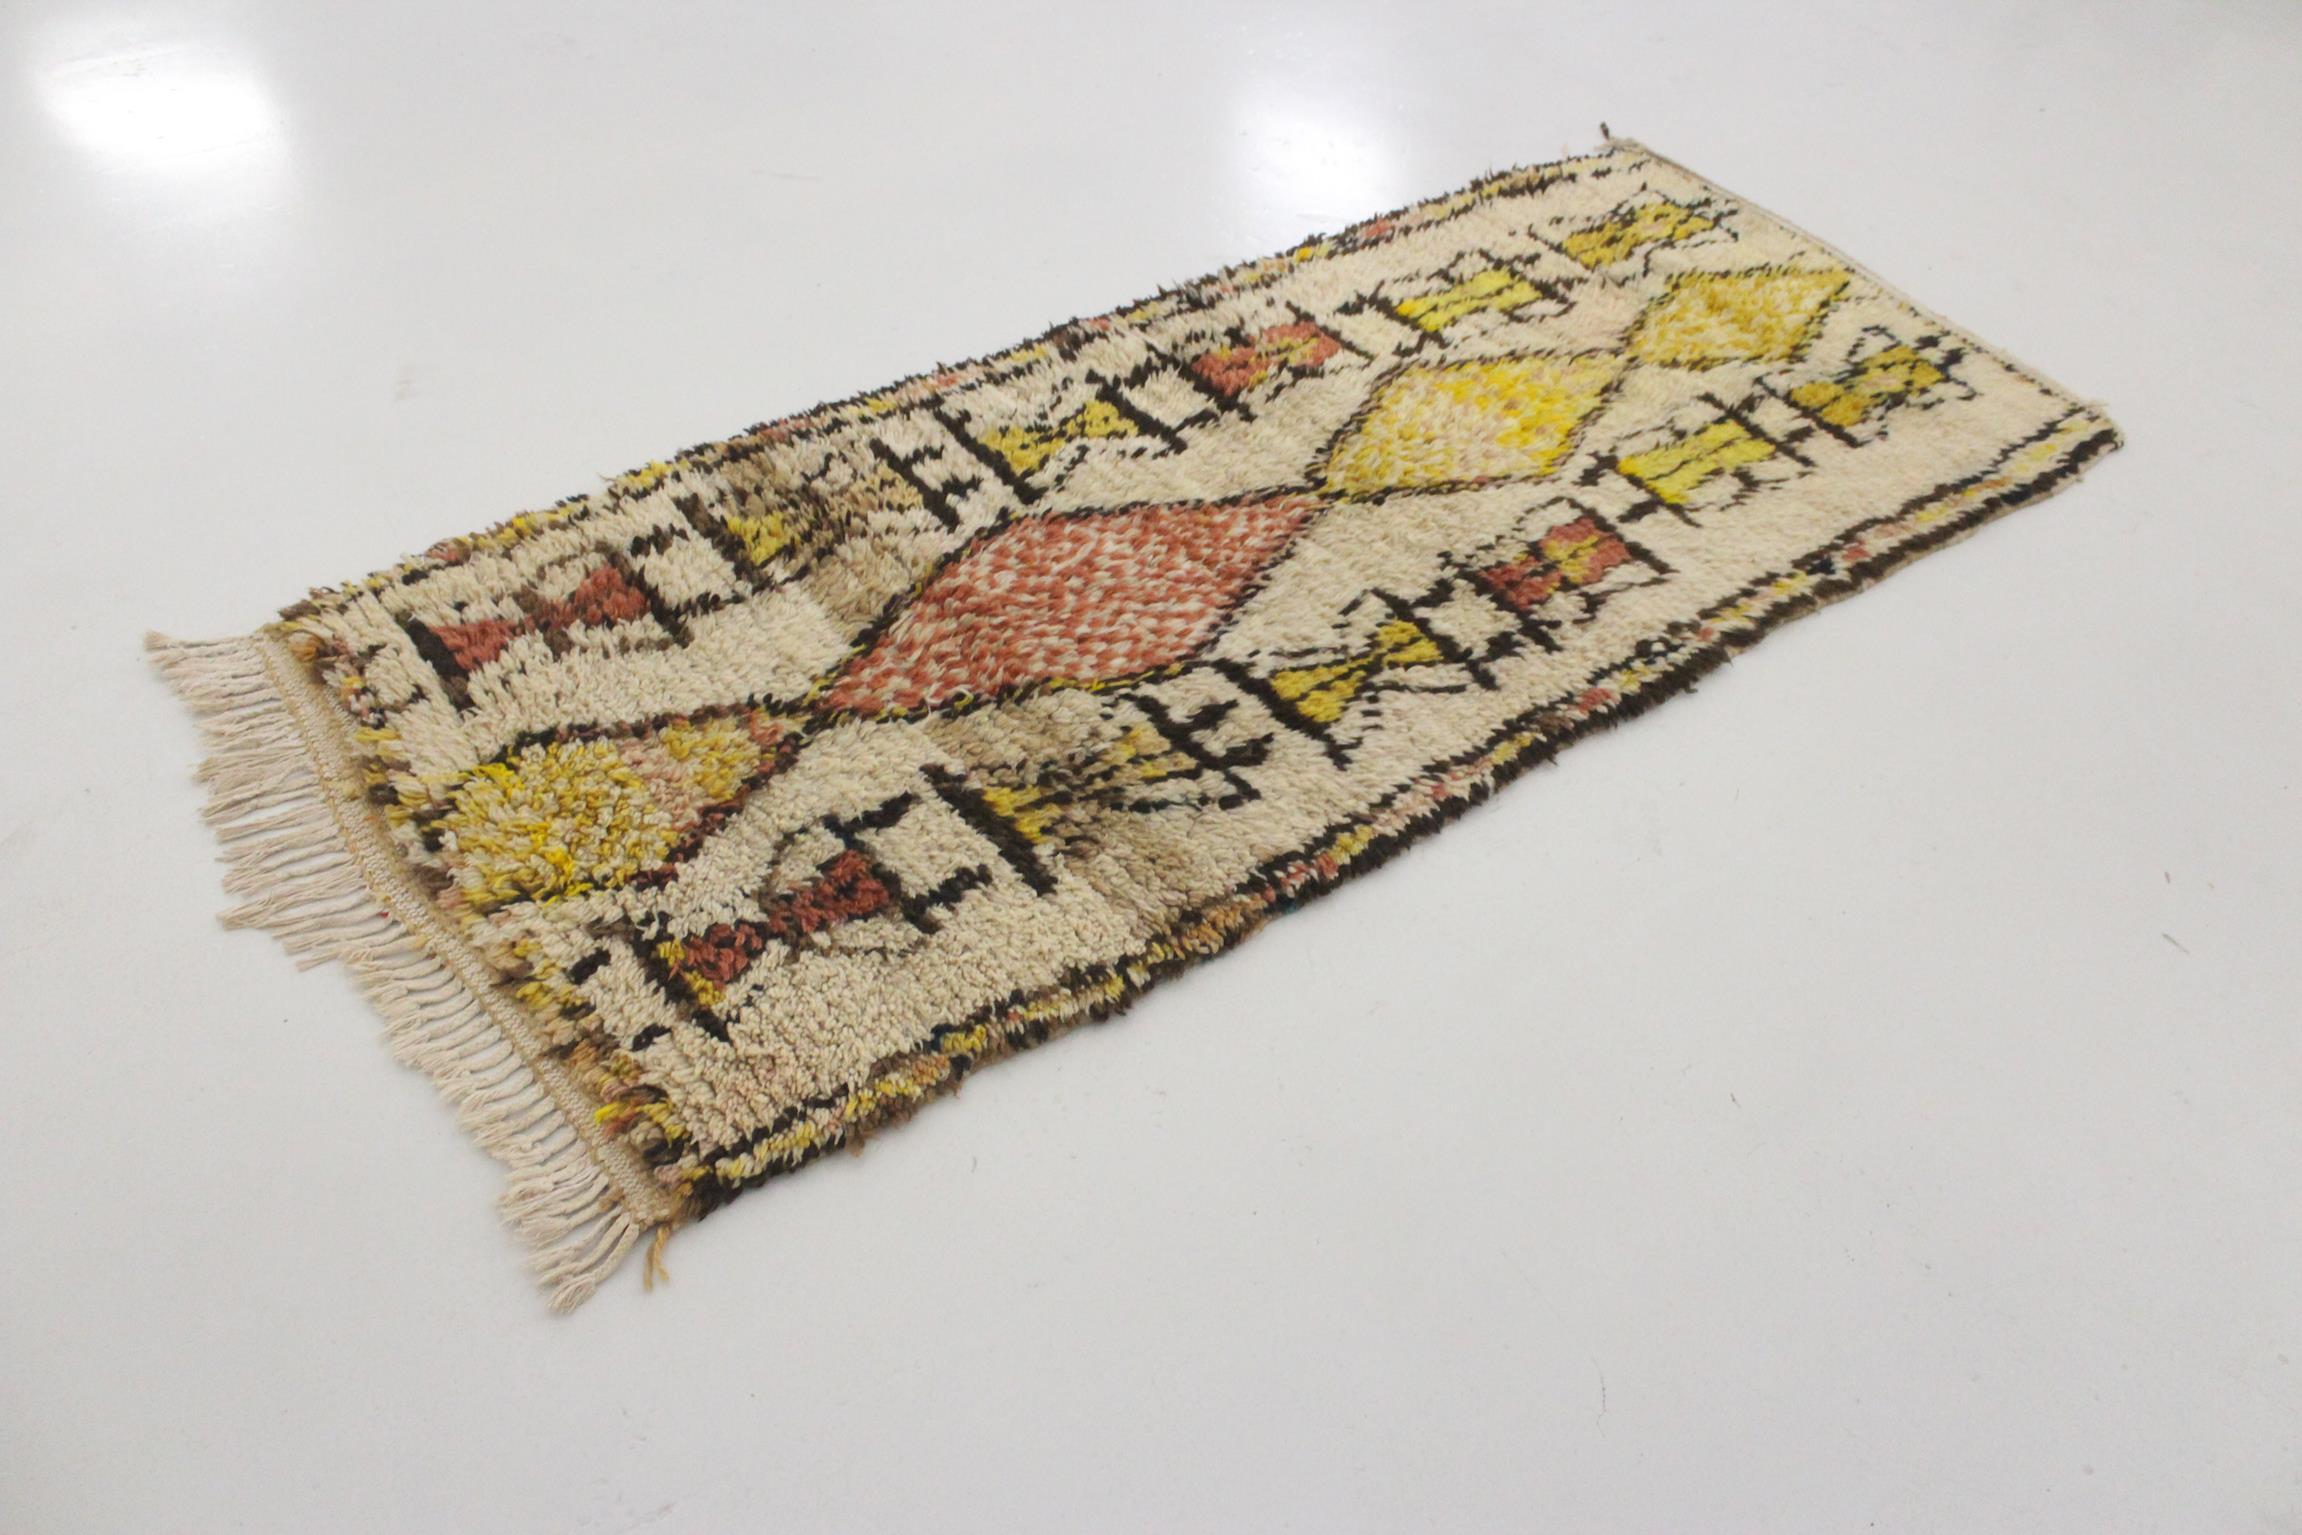 Hand-Woven Vintage Moroccan Azilal rug - Beige, yellow, terracotta - 2.7x6.8feet / 84x207cm For Sale